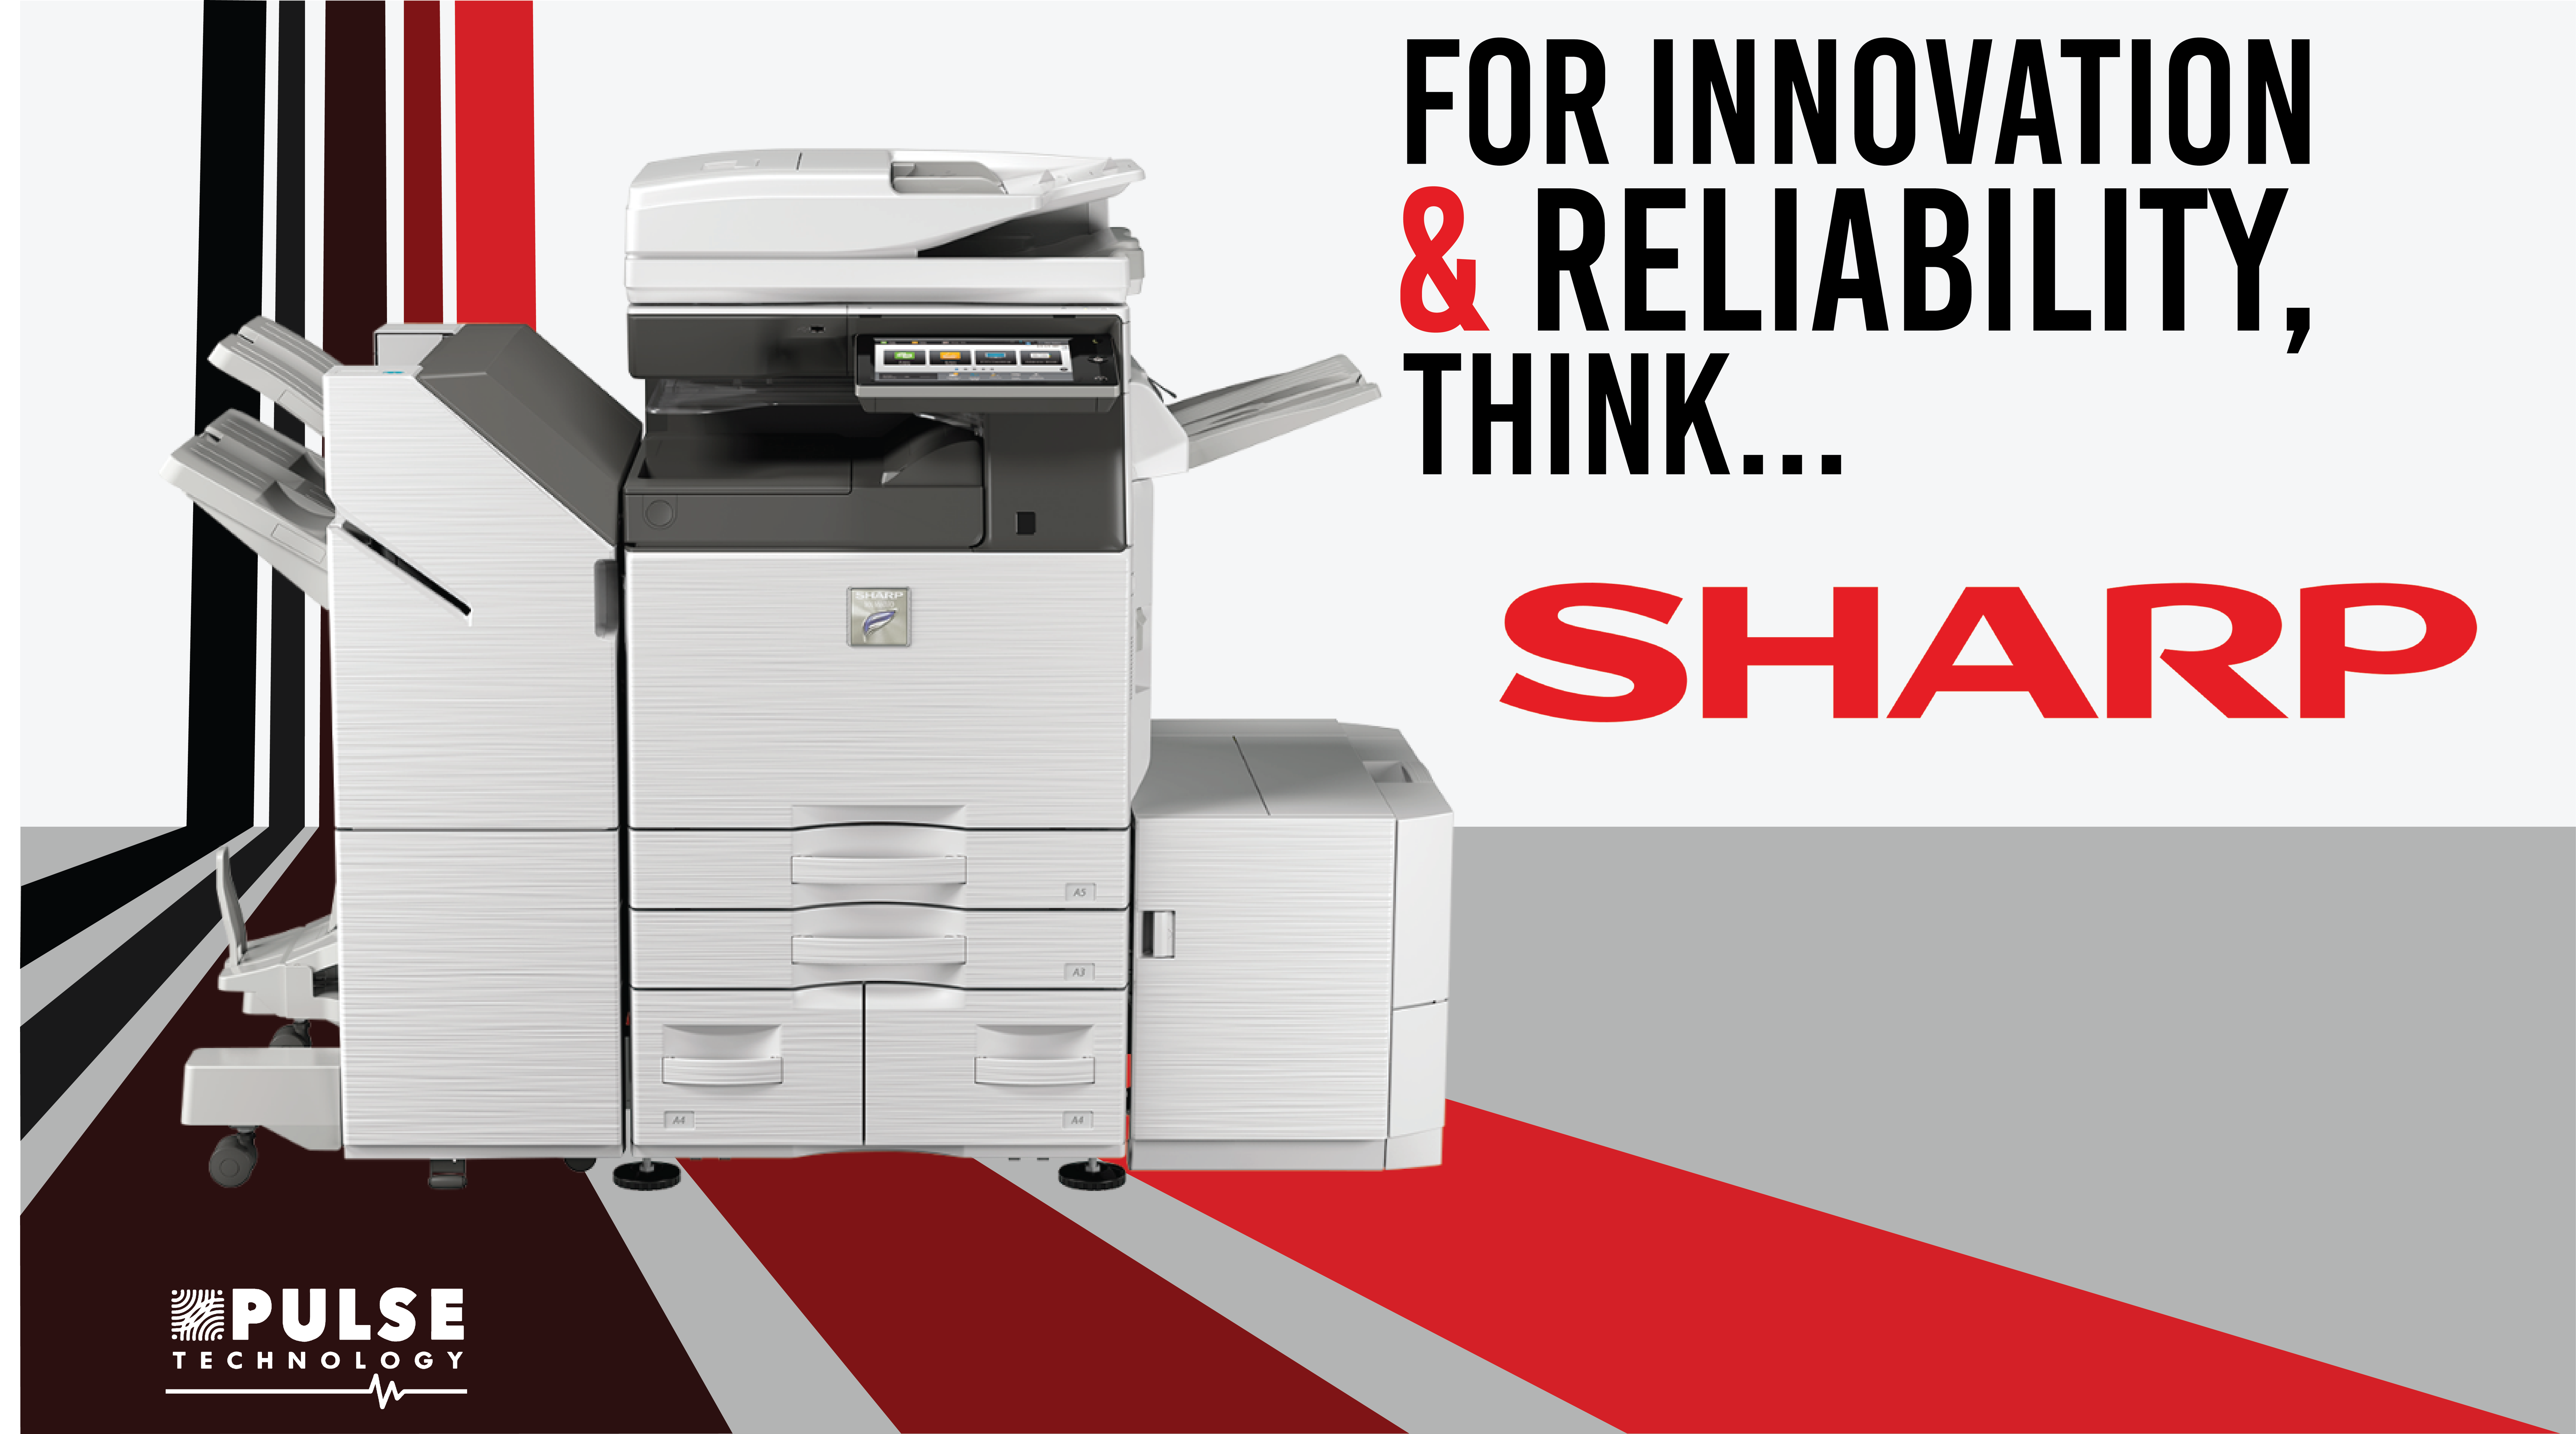 For Innovation and reliability, think Sharp